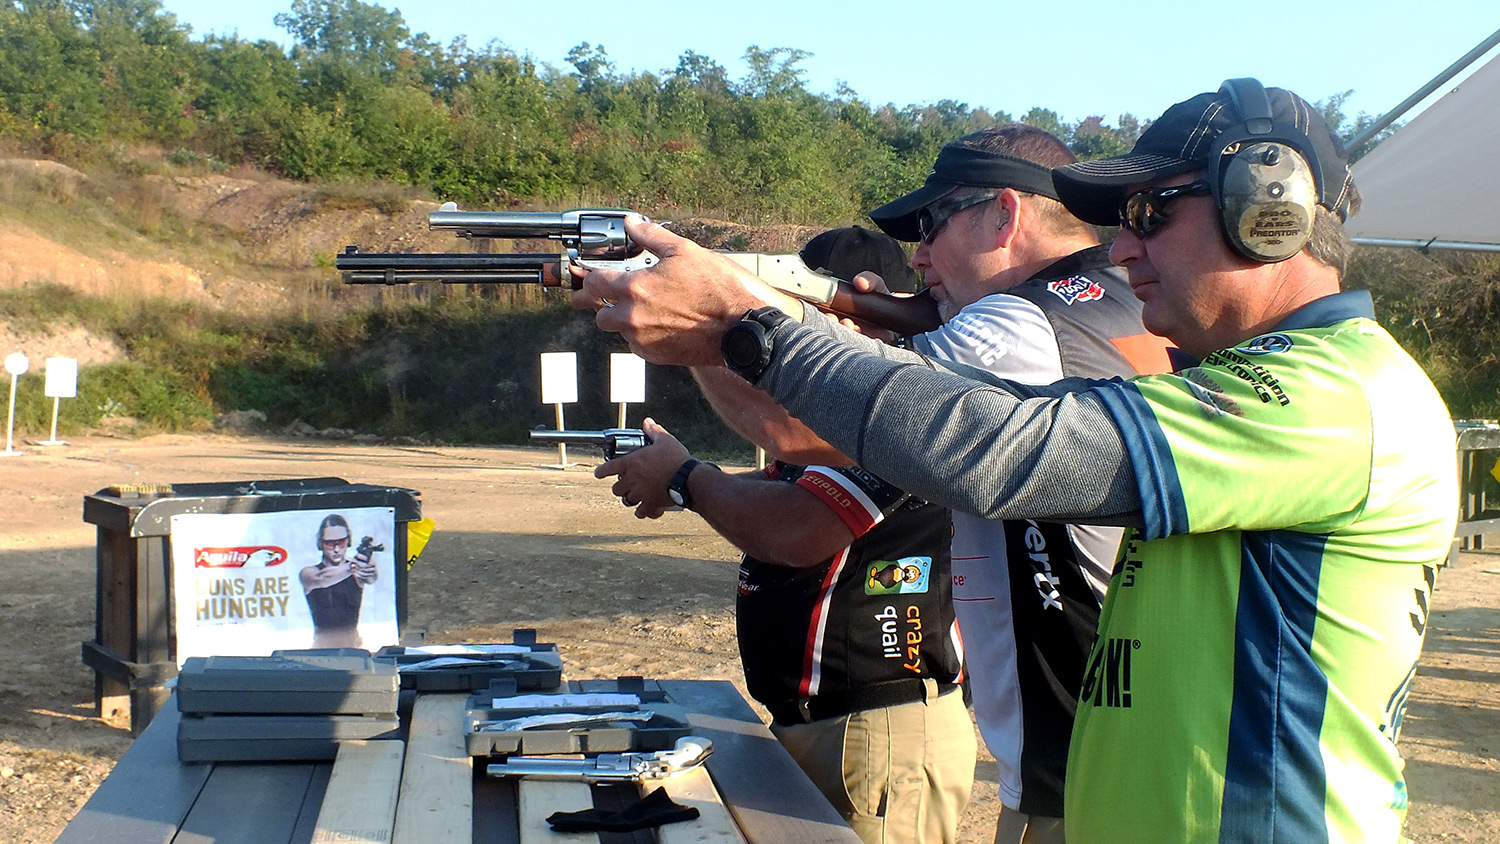 Dry firing before a stage at the NRA World Shooting Championship